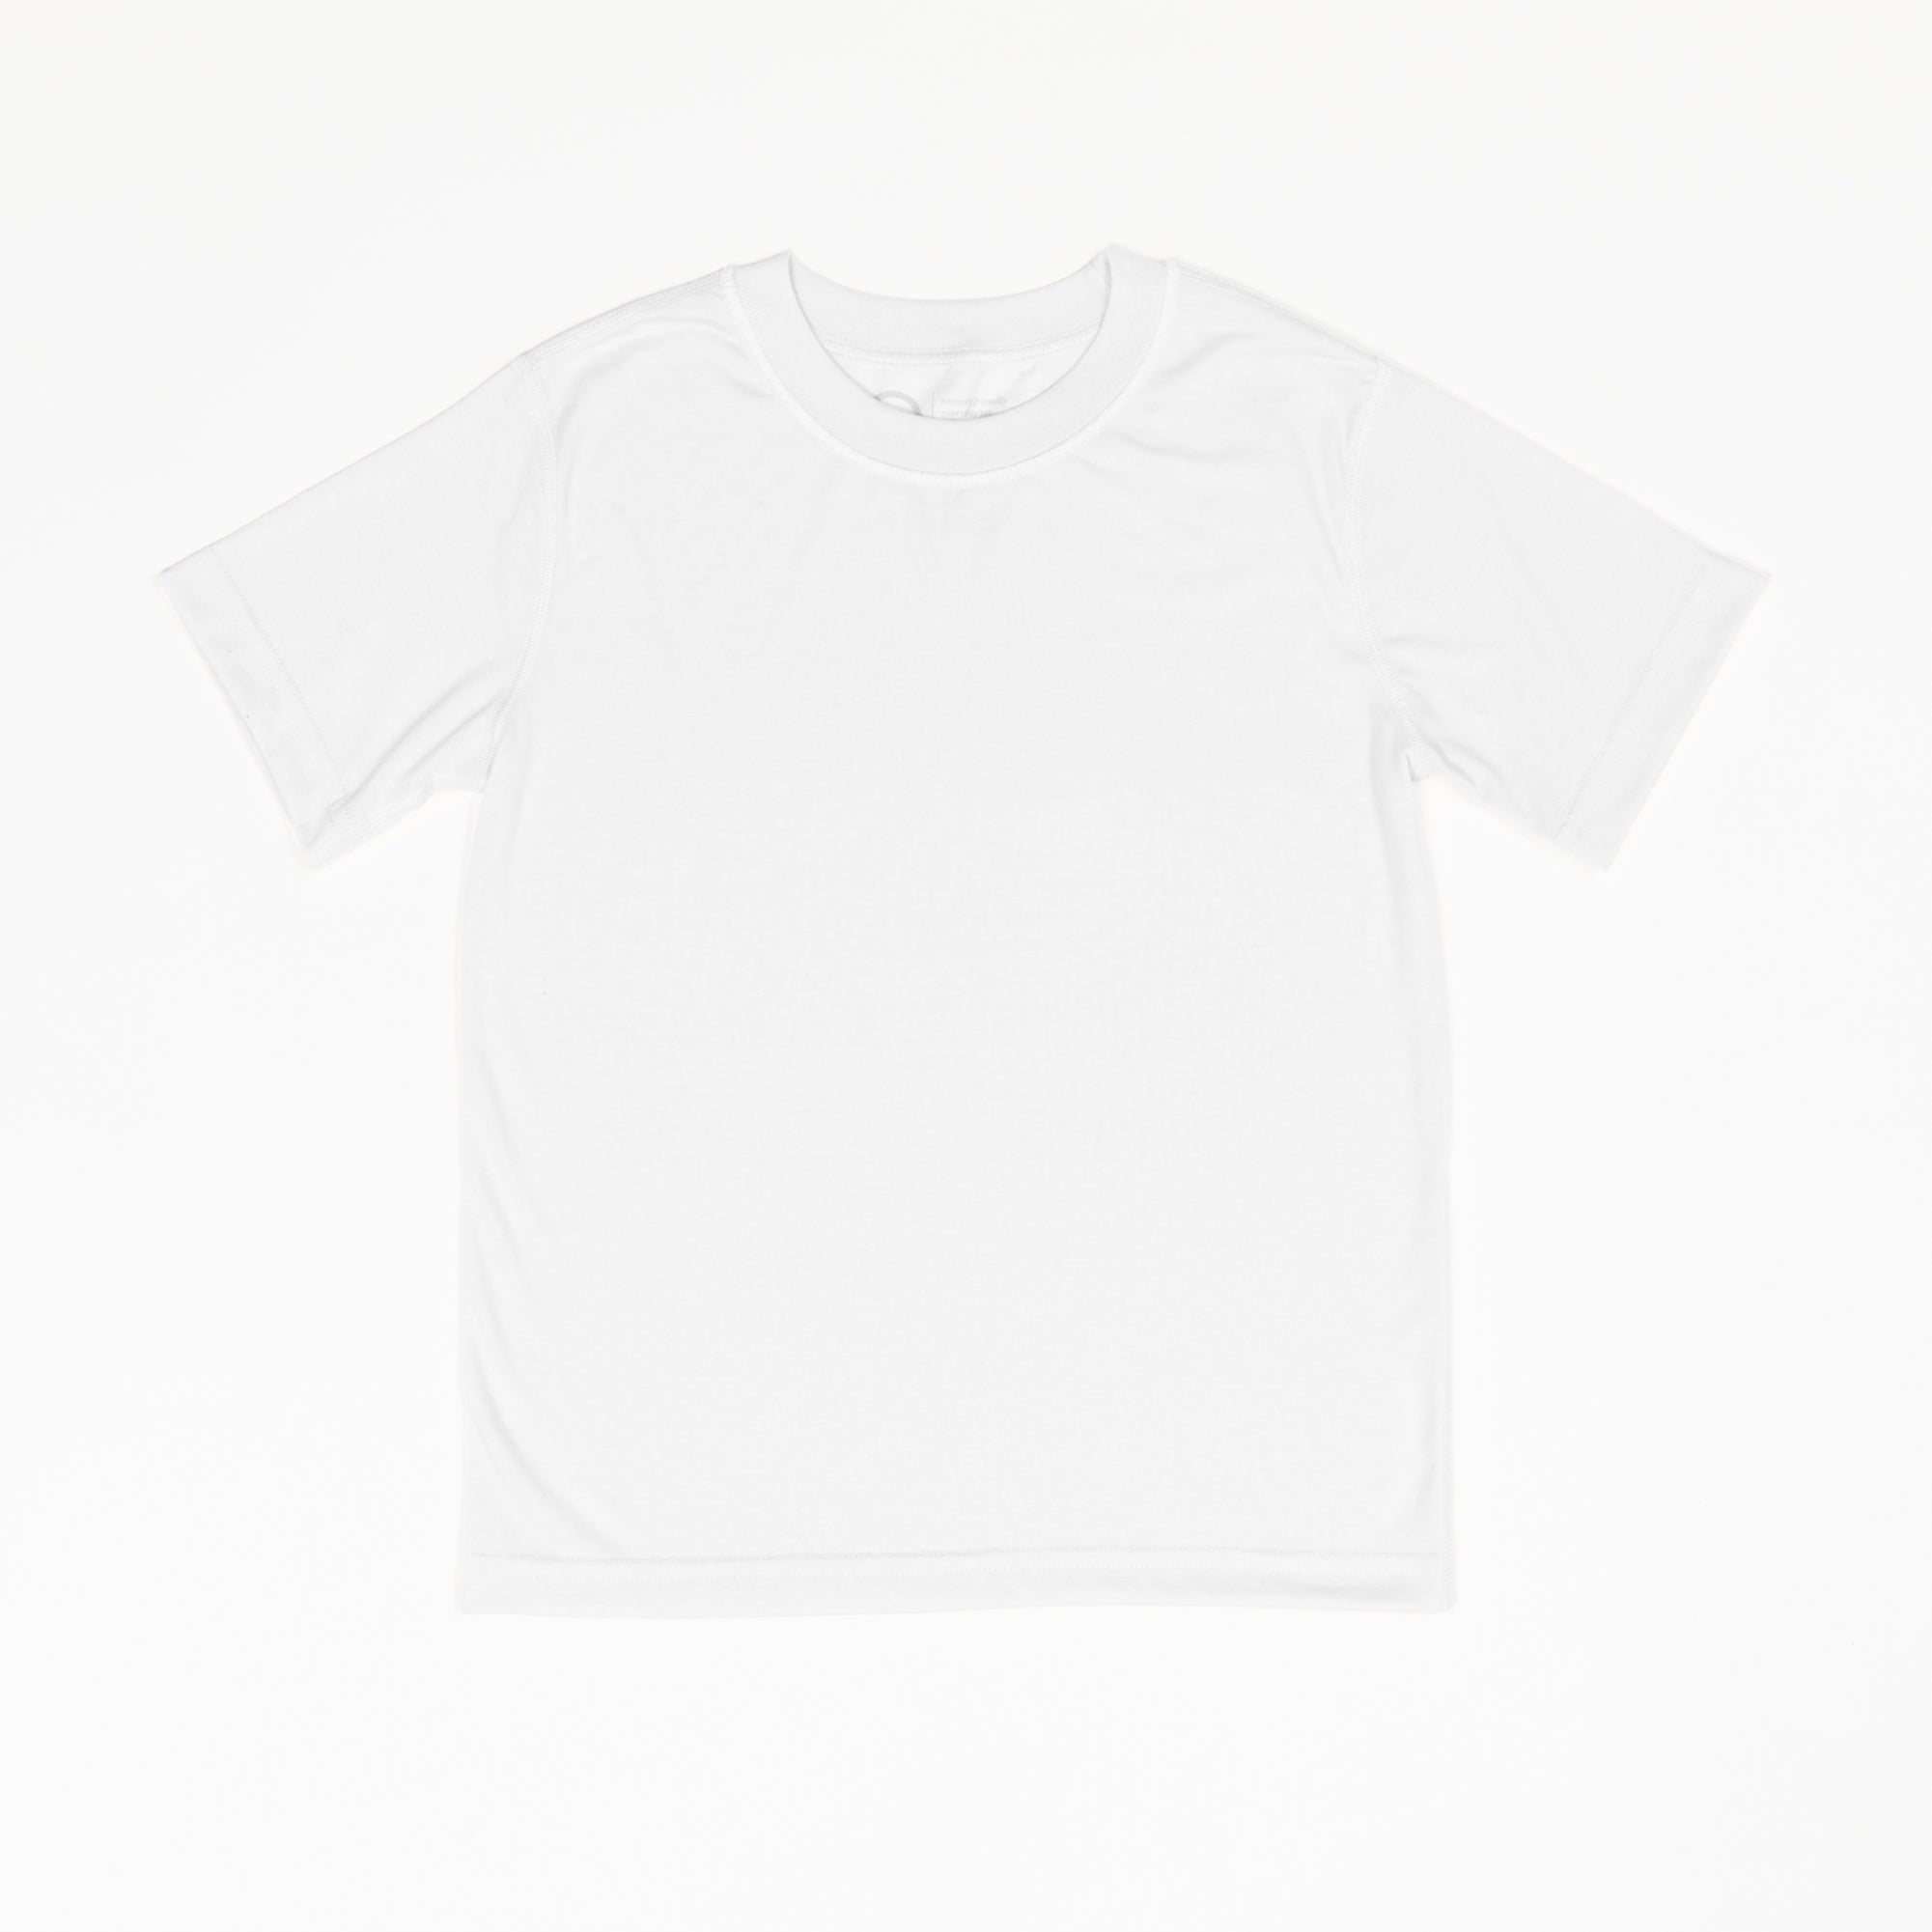 A white basic crewneck t-shirt that is laid flat on a white background.